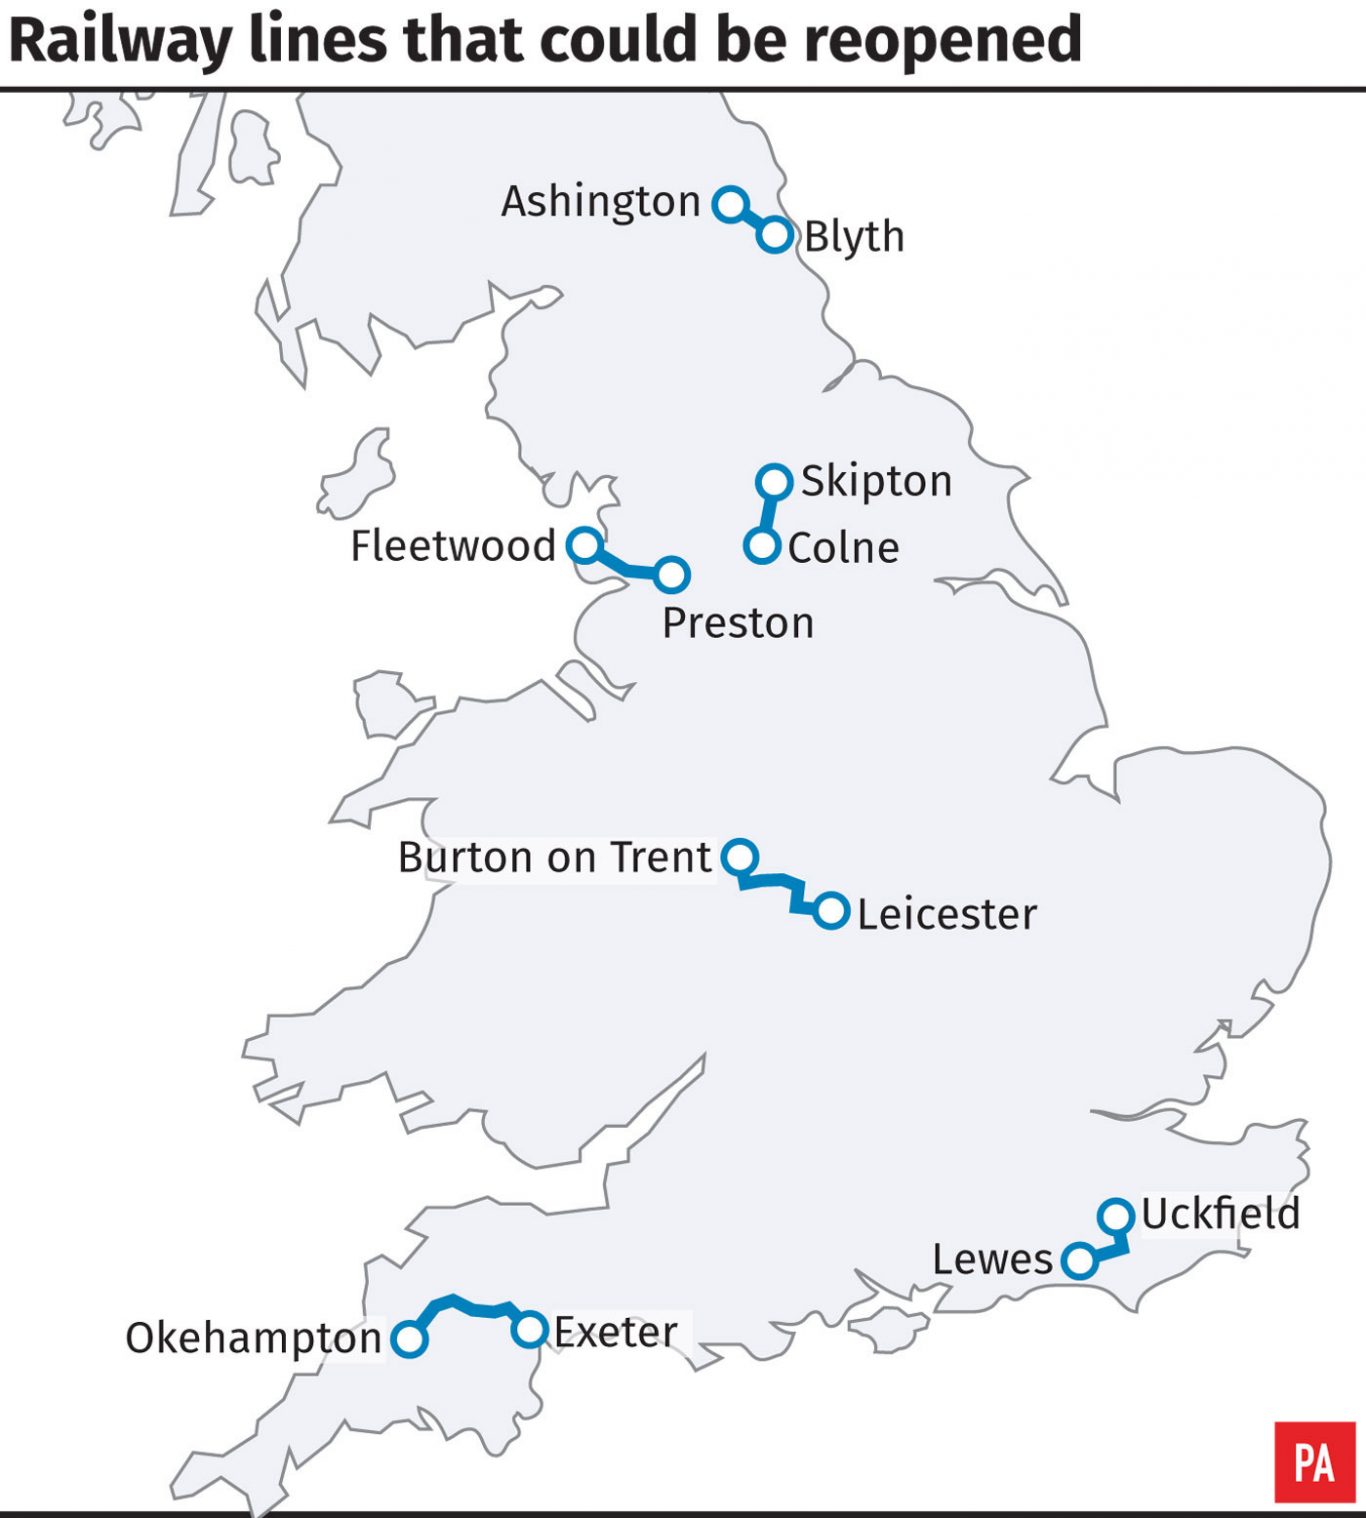 Railway lines that could be reopened